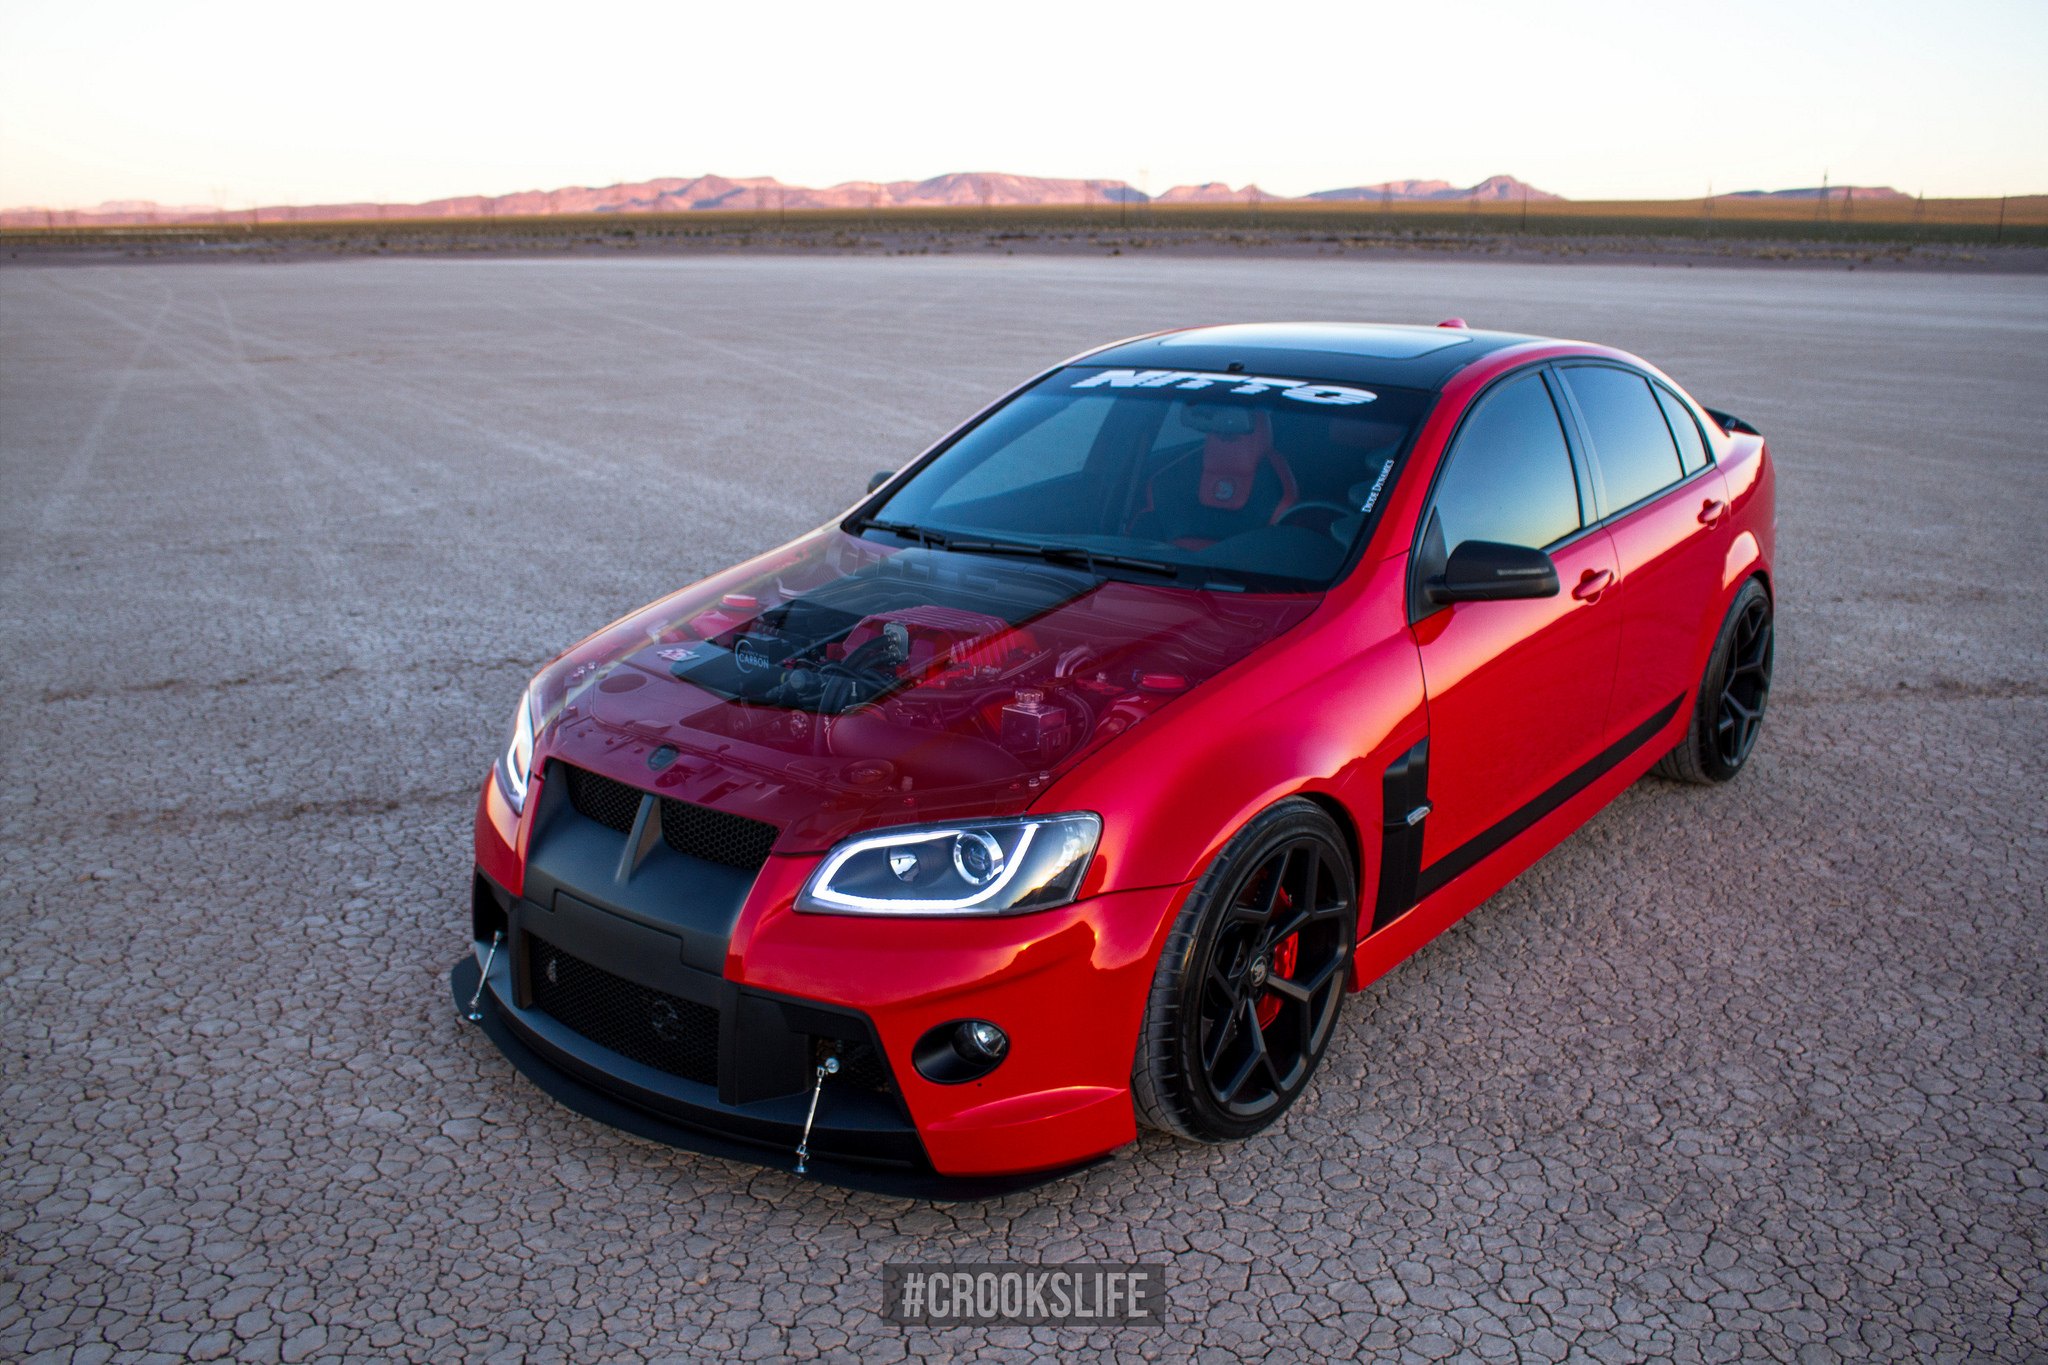 Aftermarket LED Headlights on Red Pontiac G8 - Photo by Jimmy Crook